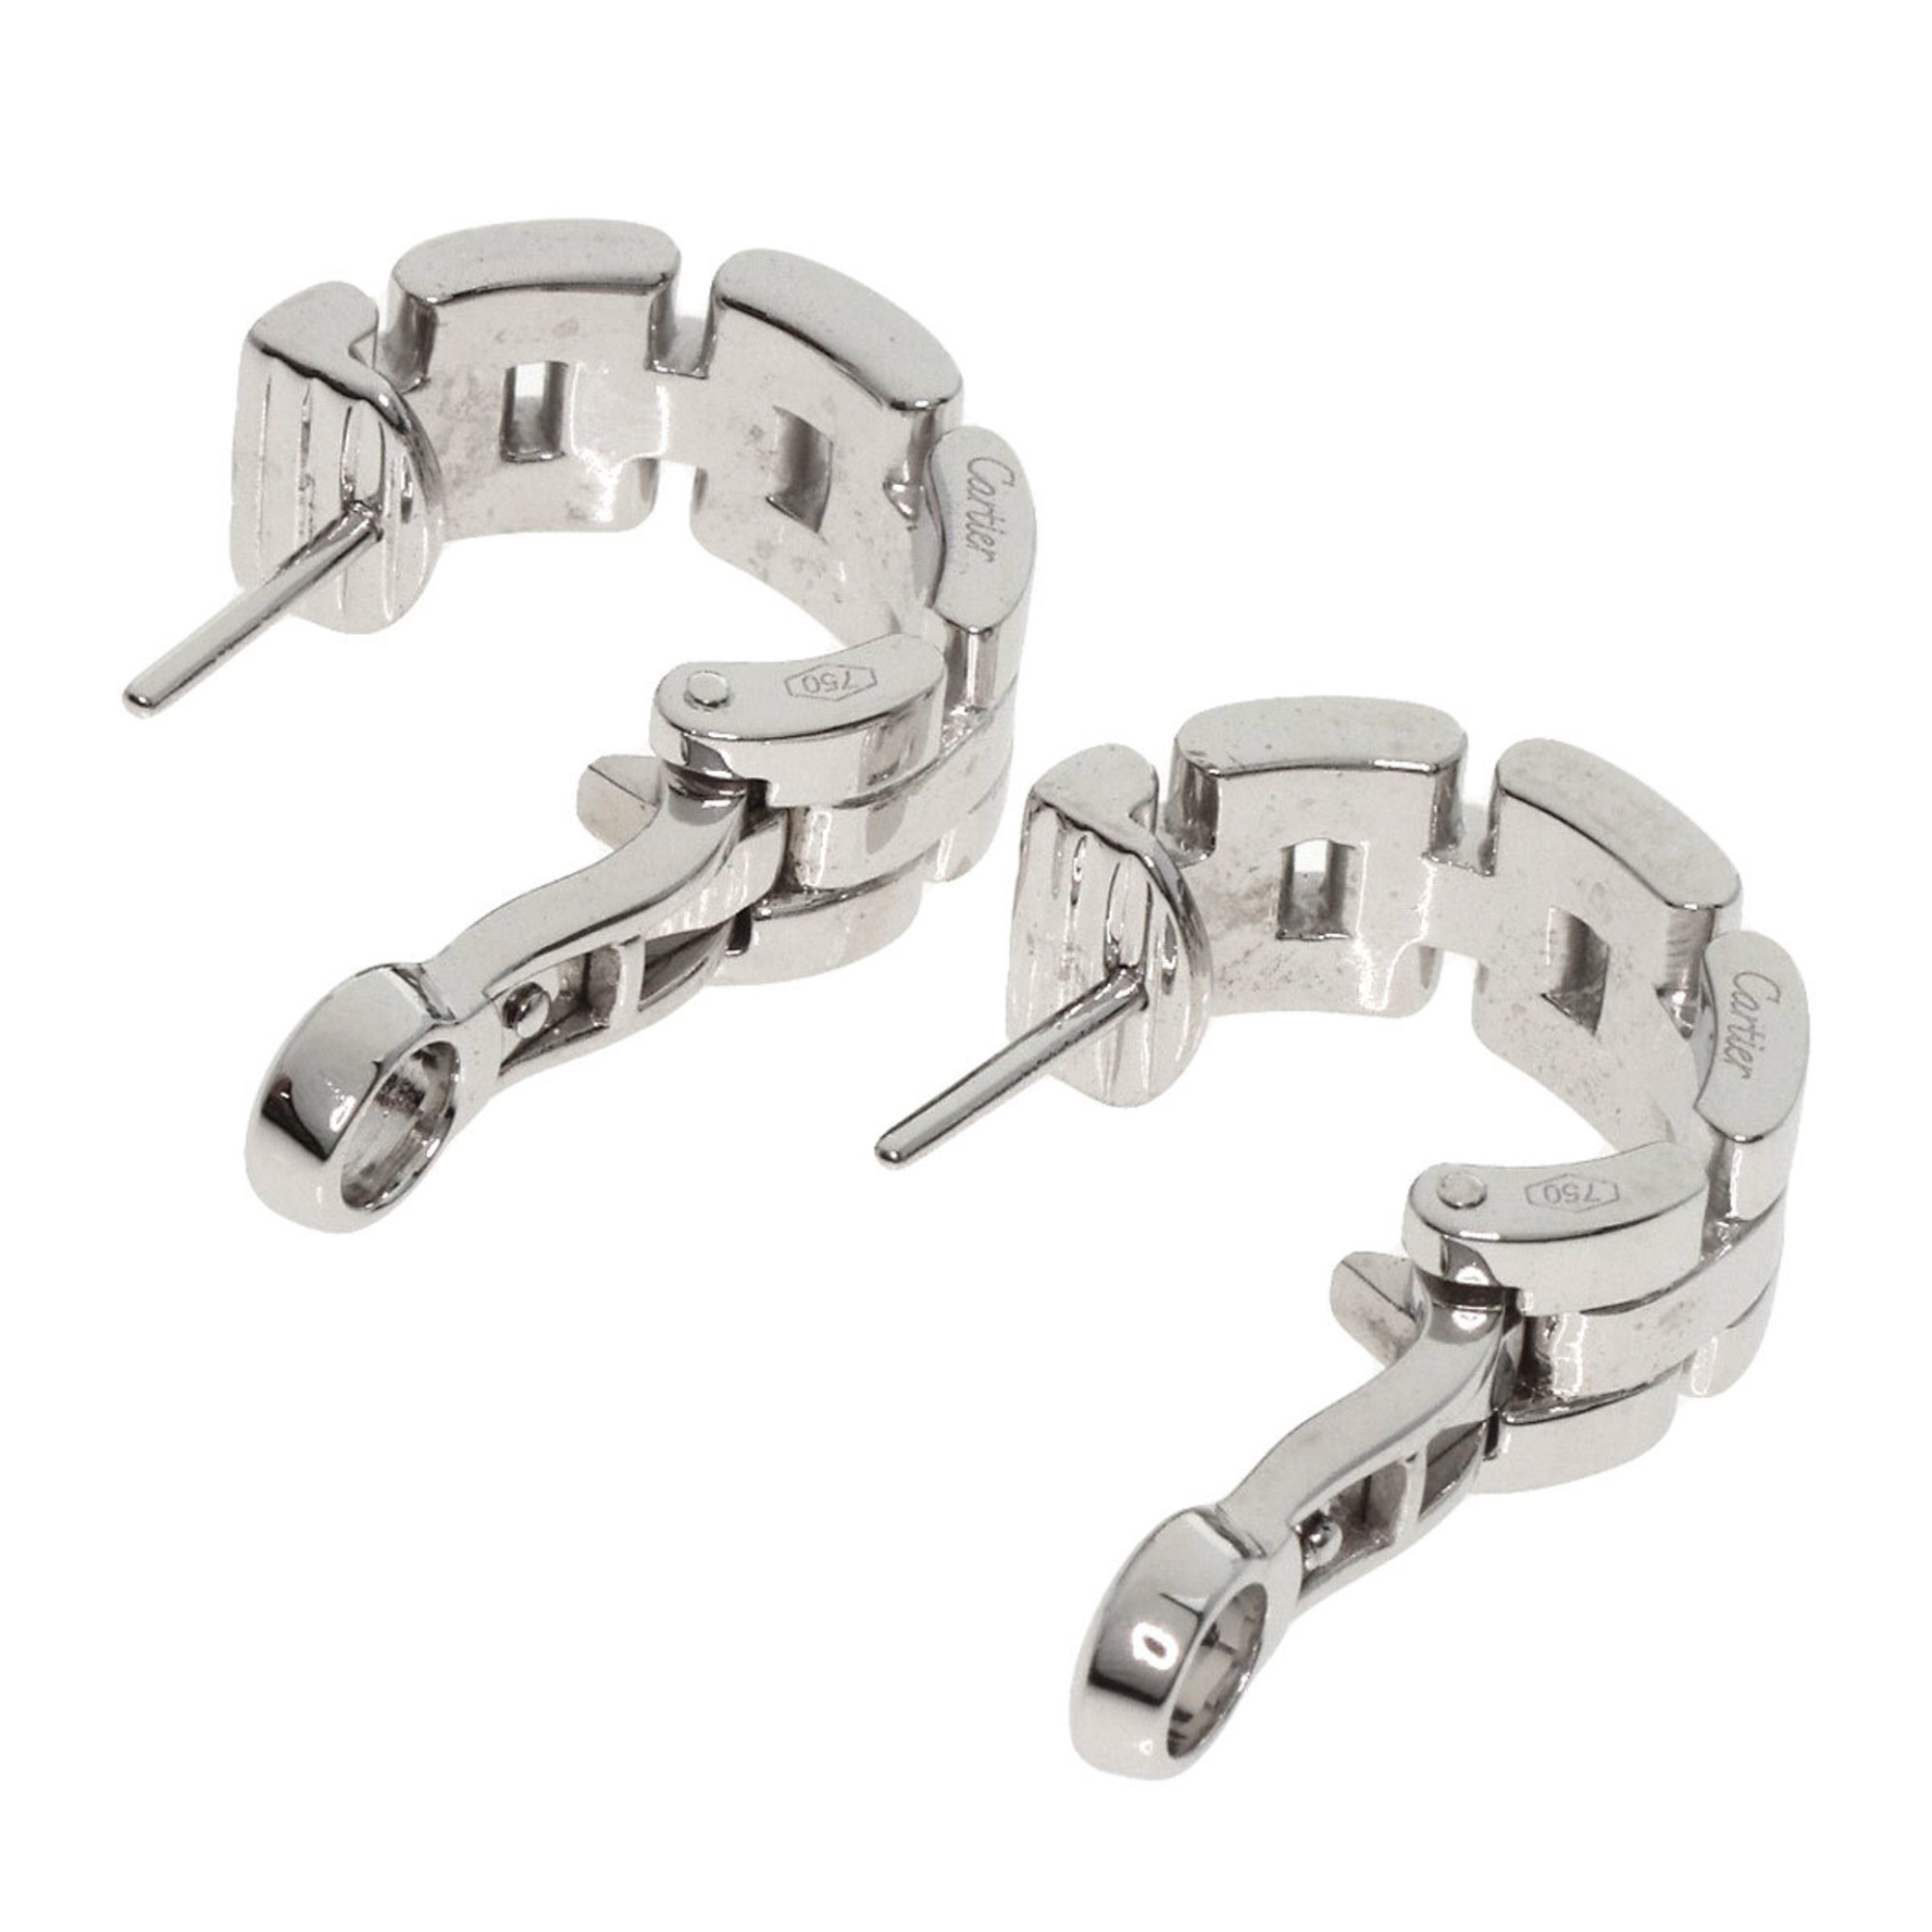 Cartier Maillon Panthere Earrings, 18K White Gold, Women's, CARTIER